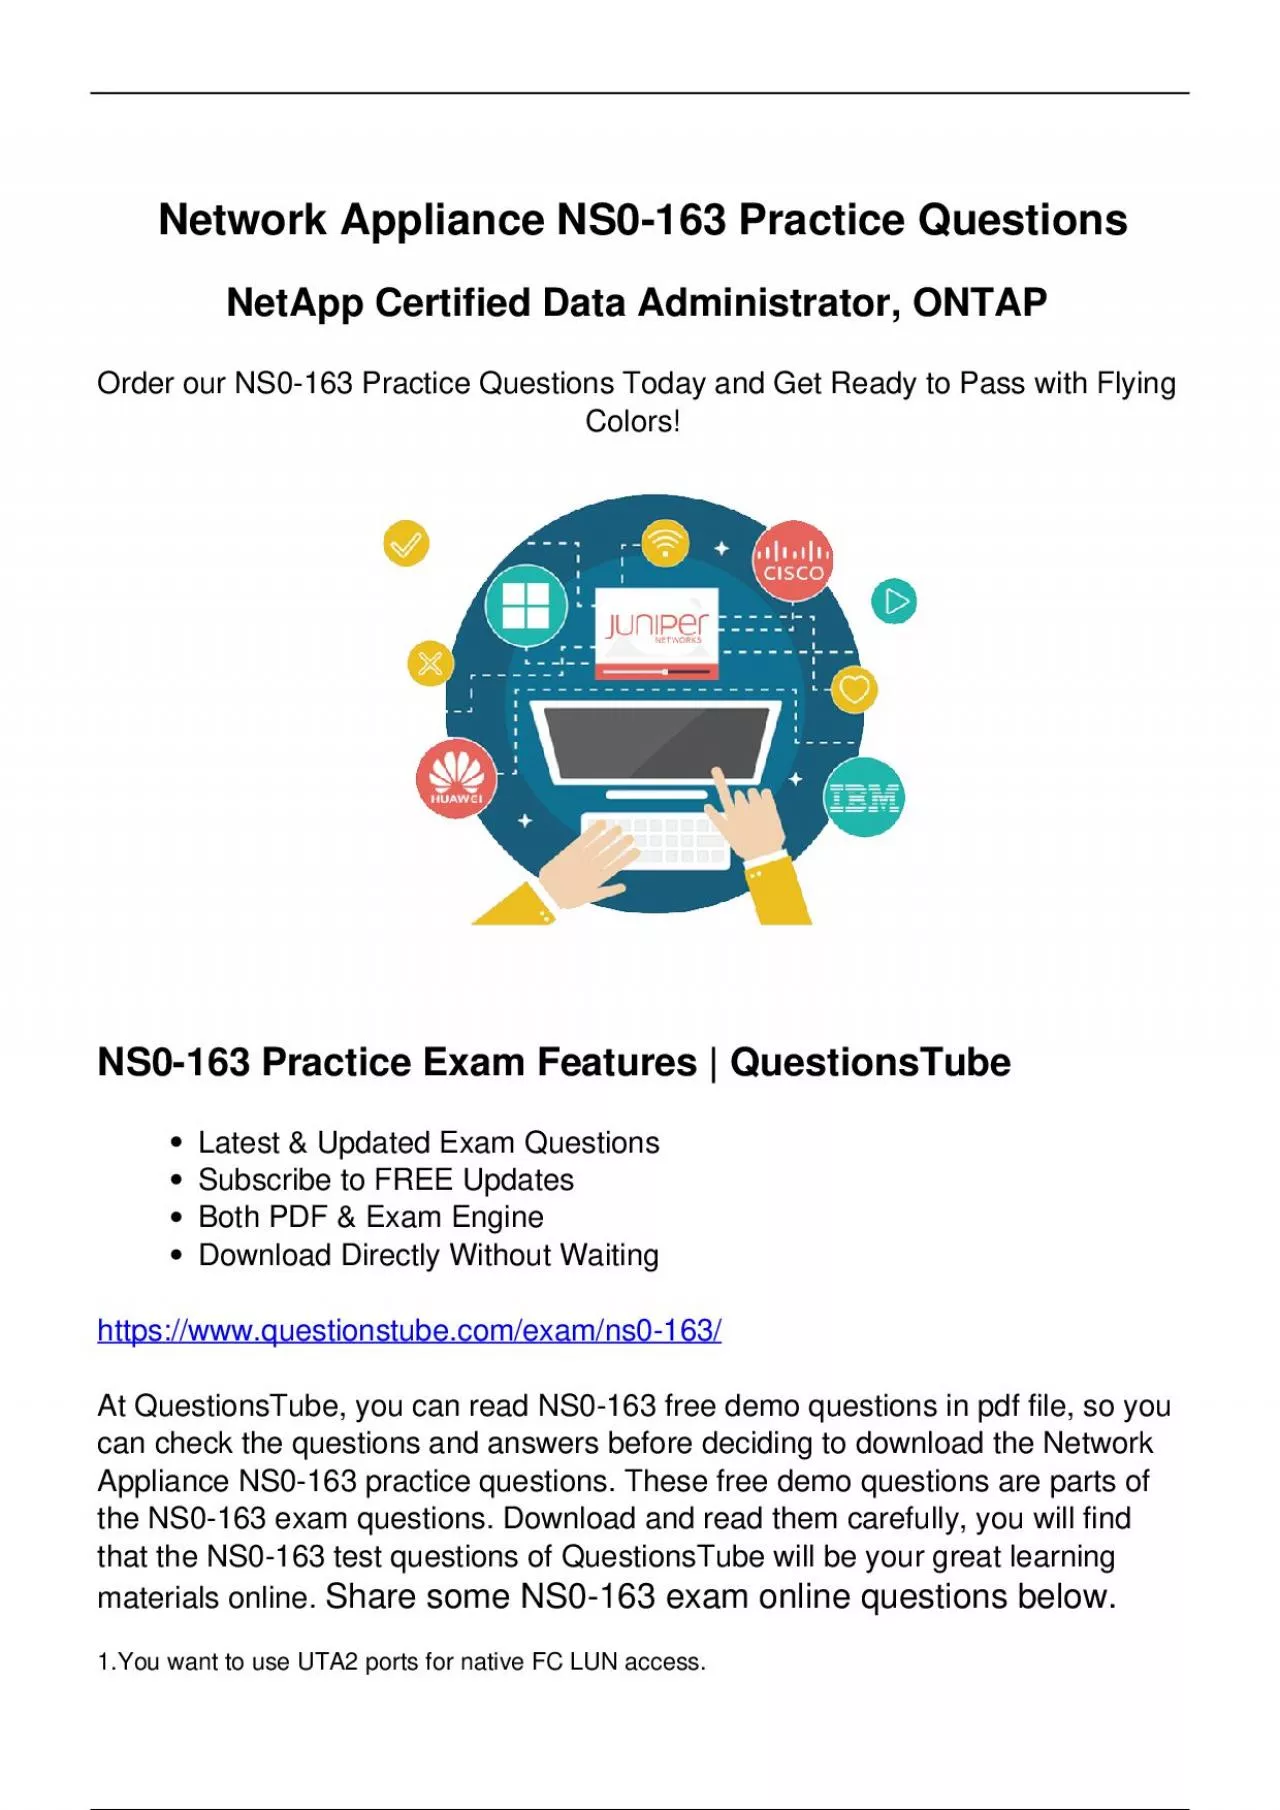 Most Updated Network Appliance NS0-163 Practice Questions - Ensure Your Success